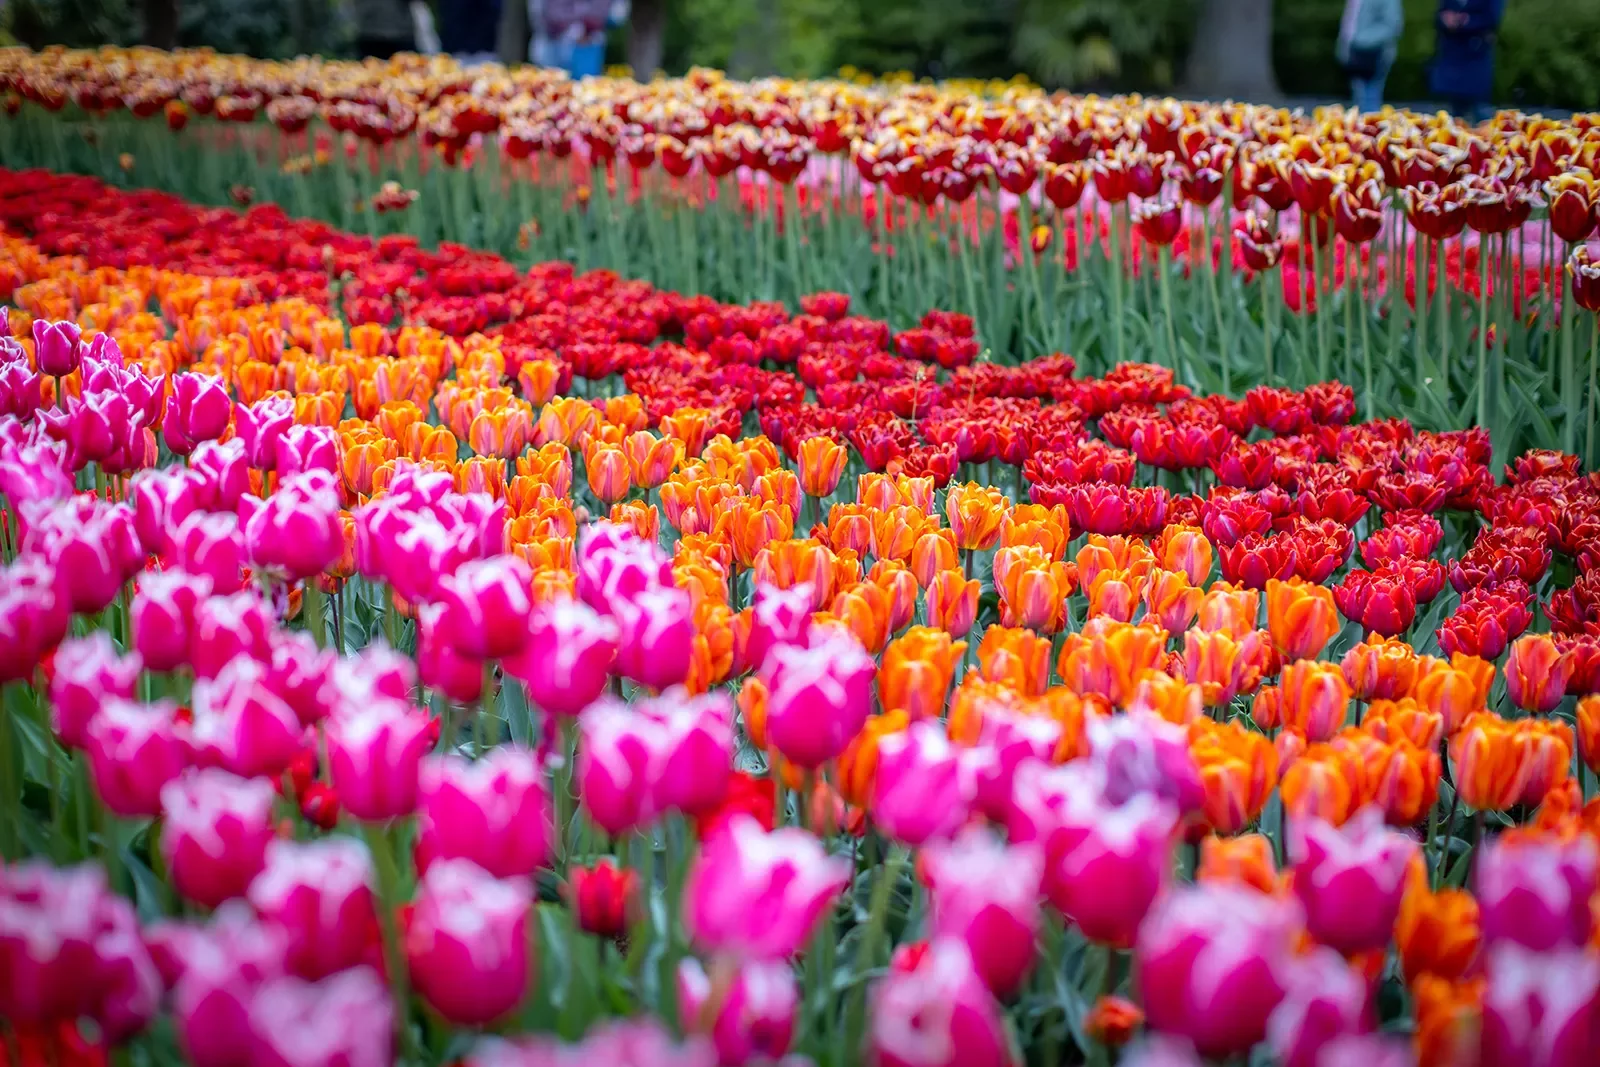 Four Rows of Tulips Purple, Orange, Red, Yellow Red Netherlands